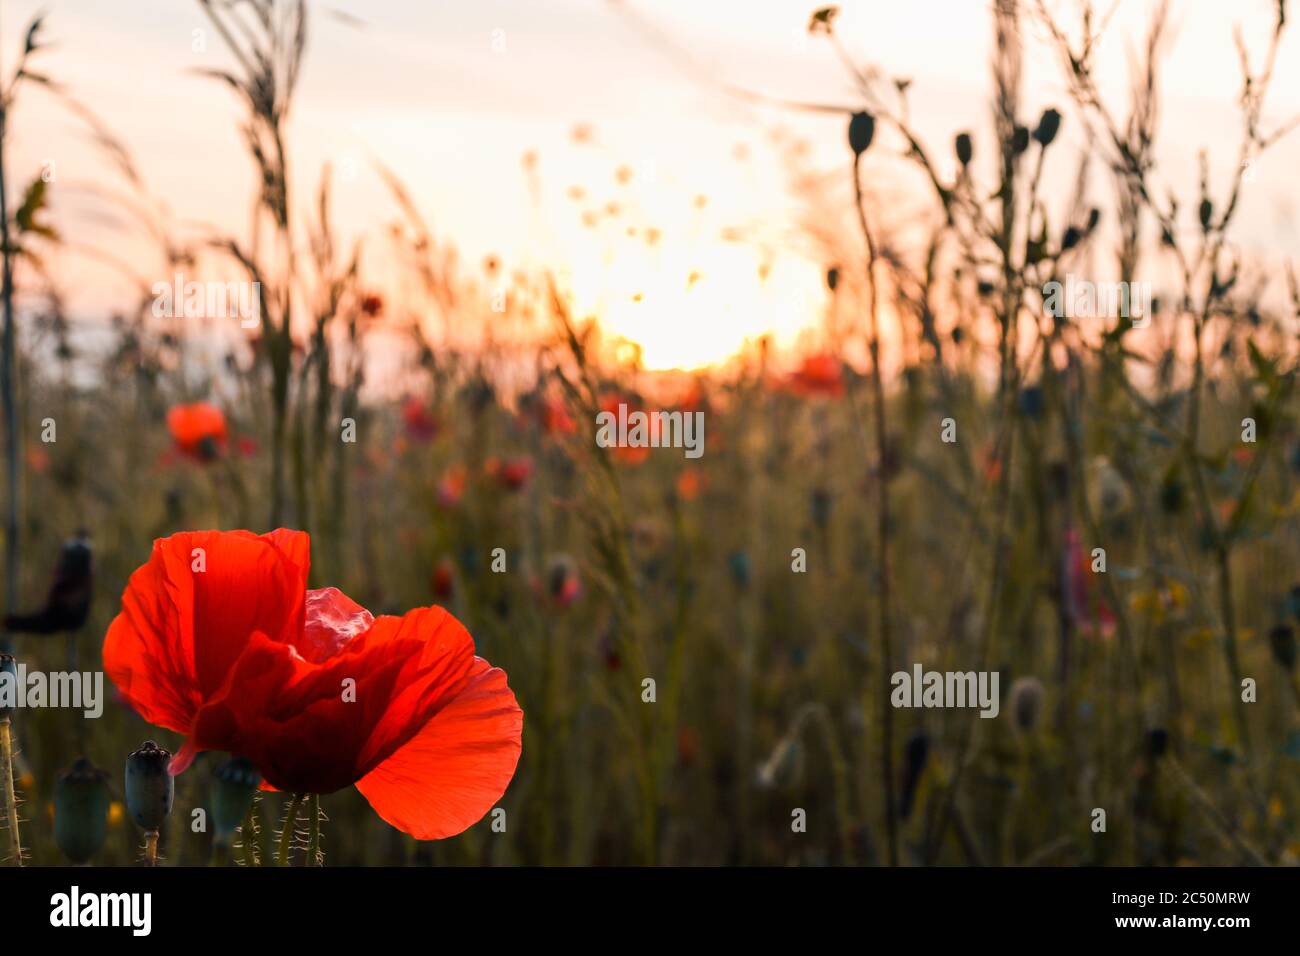 Beautiful red poppy flower close-up with control light of the golden hour sunset shining through petals Stock Photo